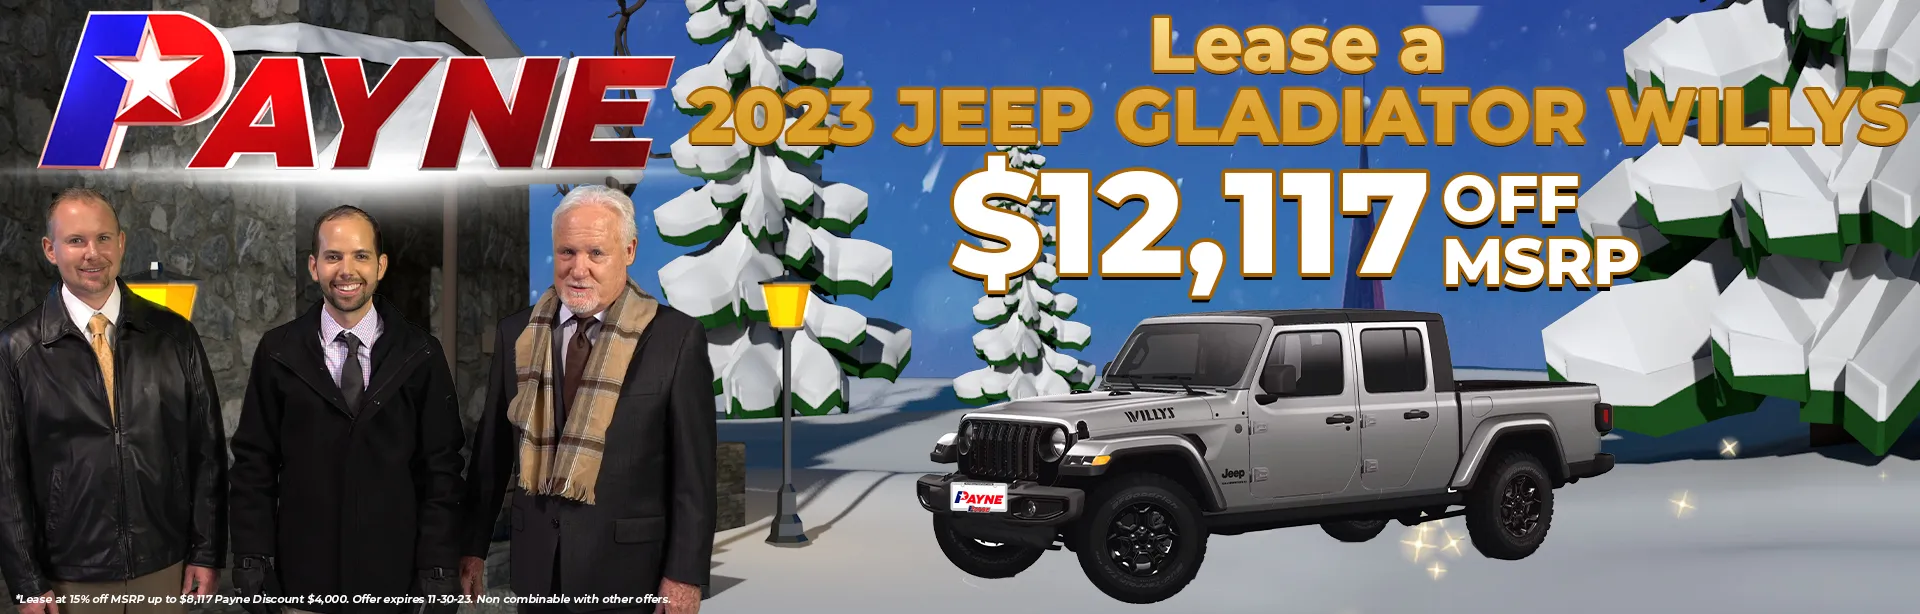 2023 Jeep Gladiator Willy's Lease $12,117 Off MSRP